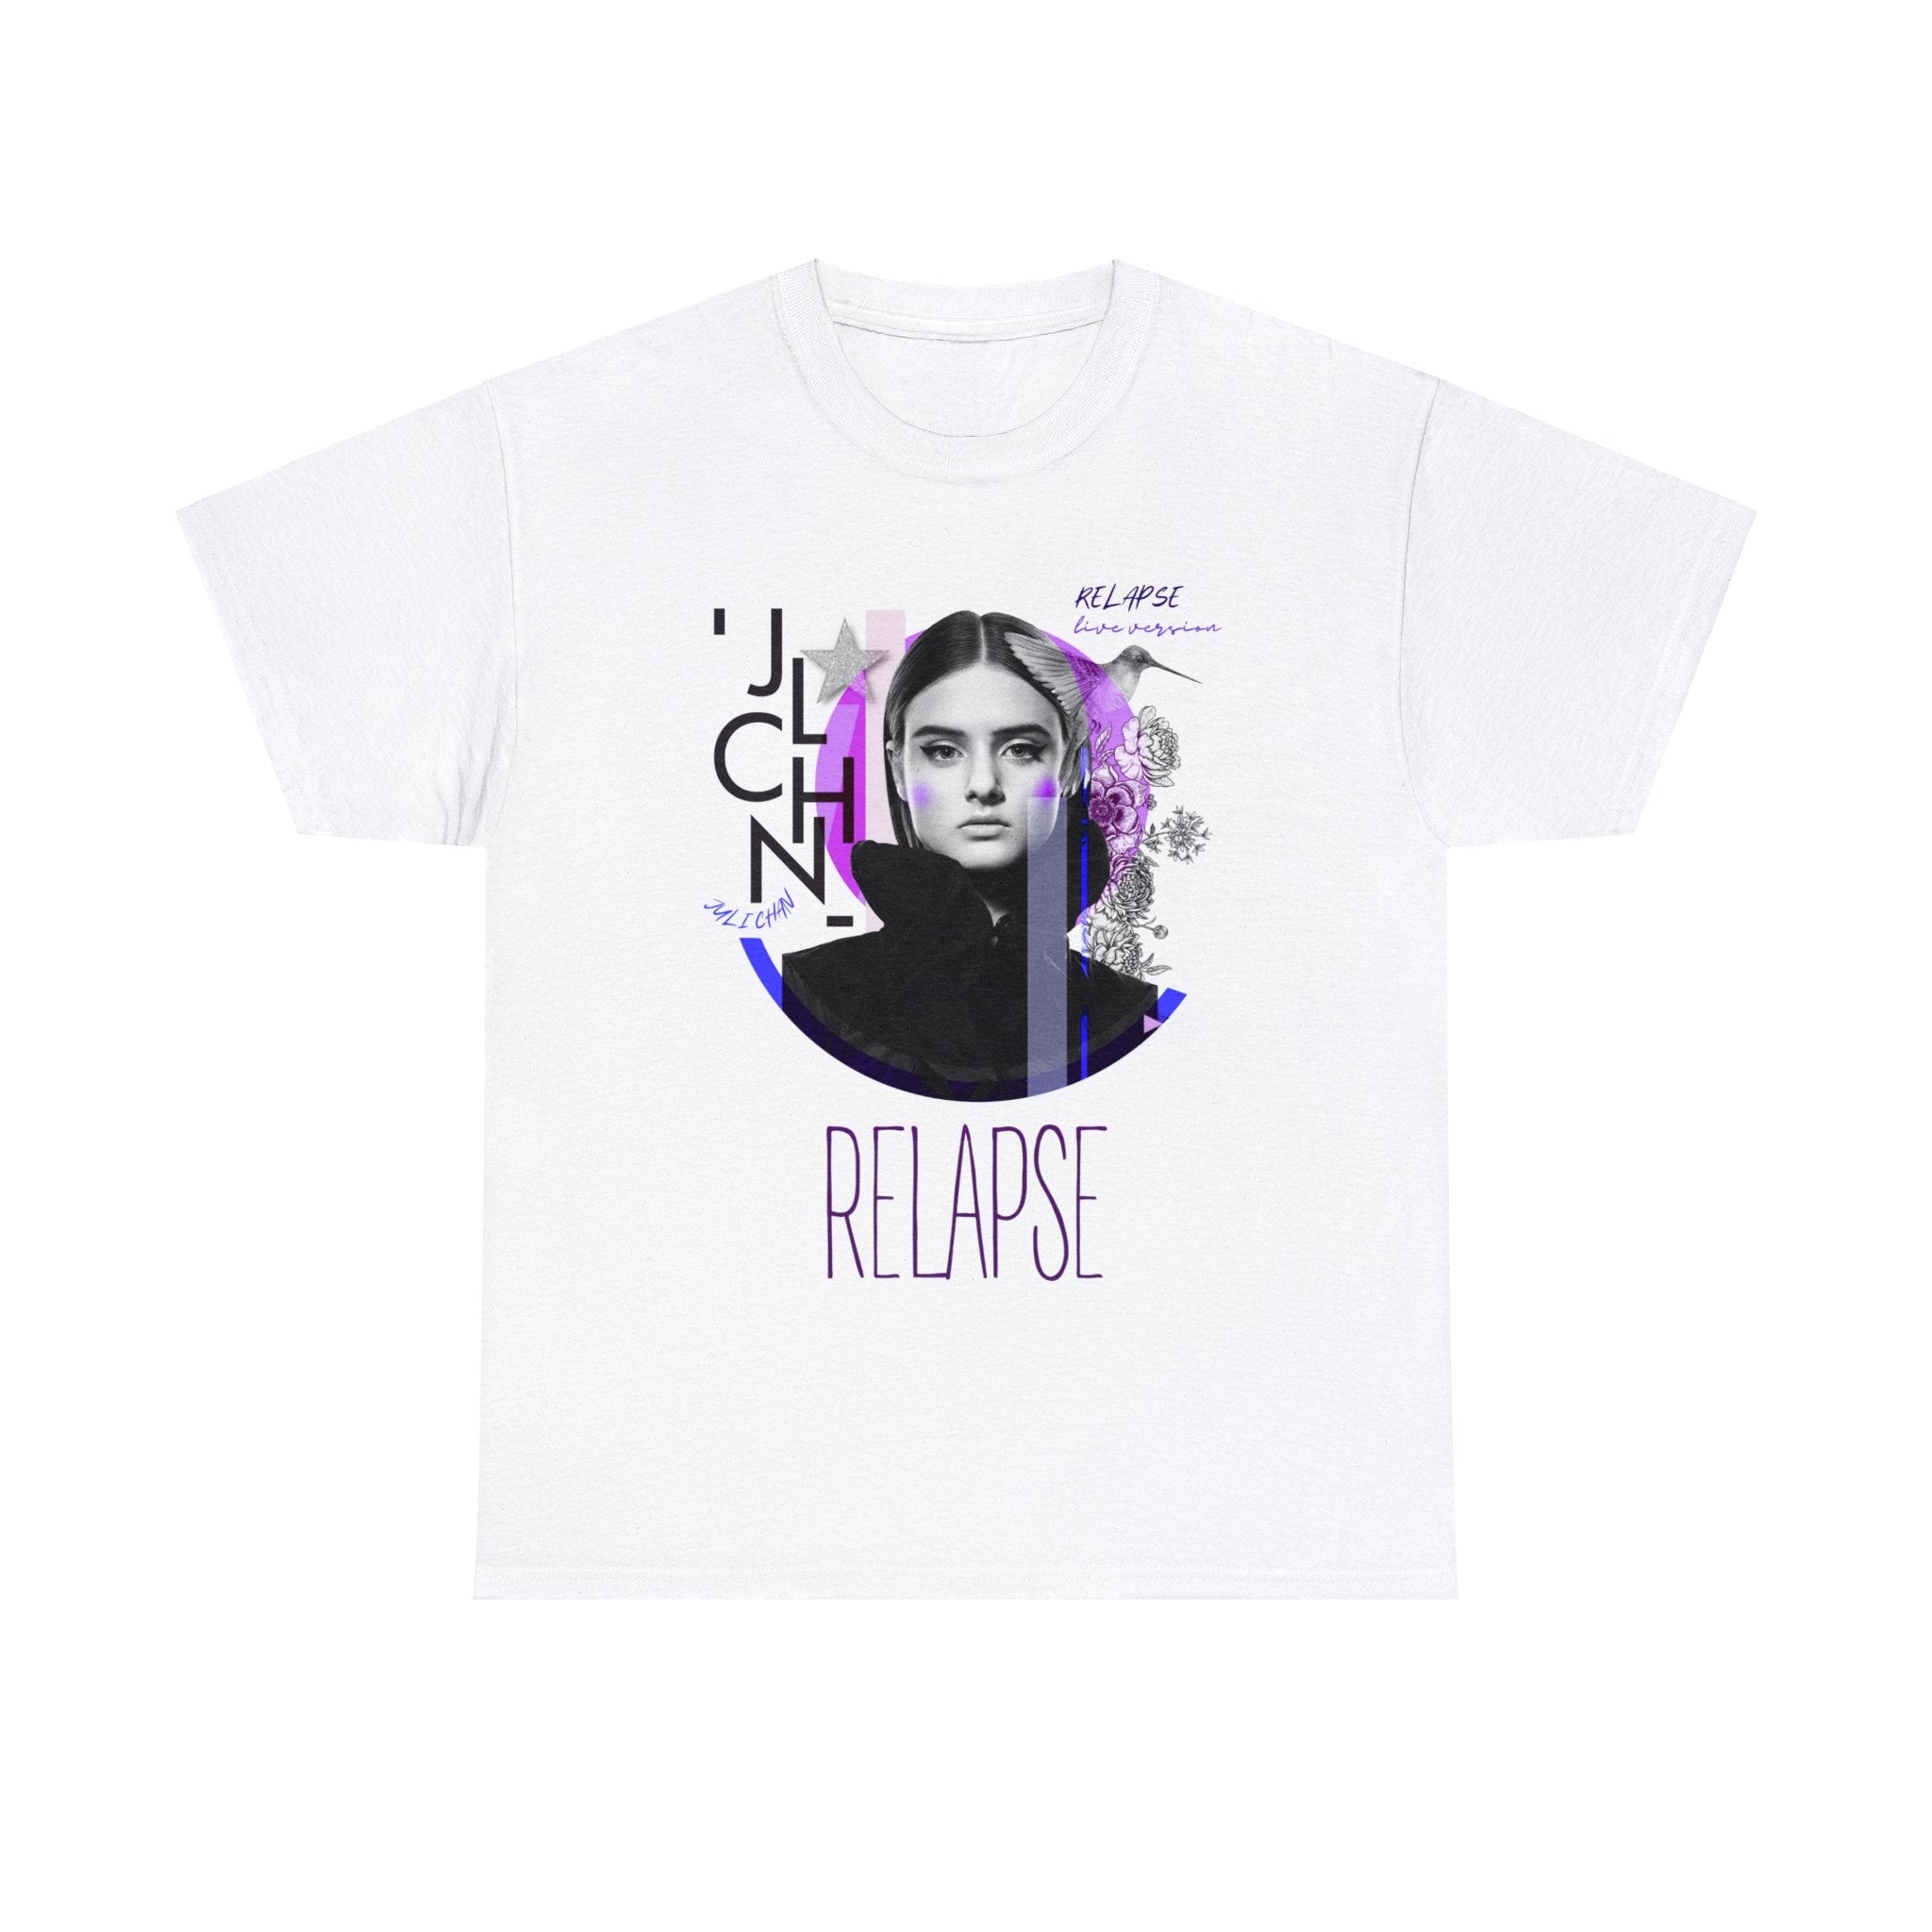 Juli Chan's 'Relapse' Cover Art Tribute Tee - A Must Have for 'The Posh Tour' Fans